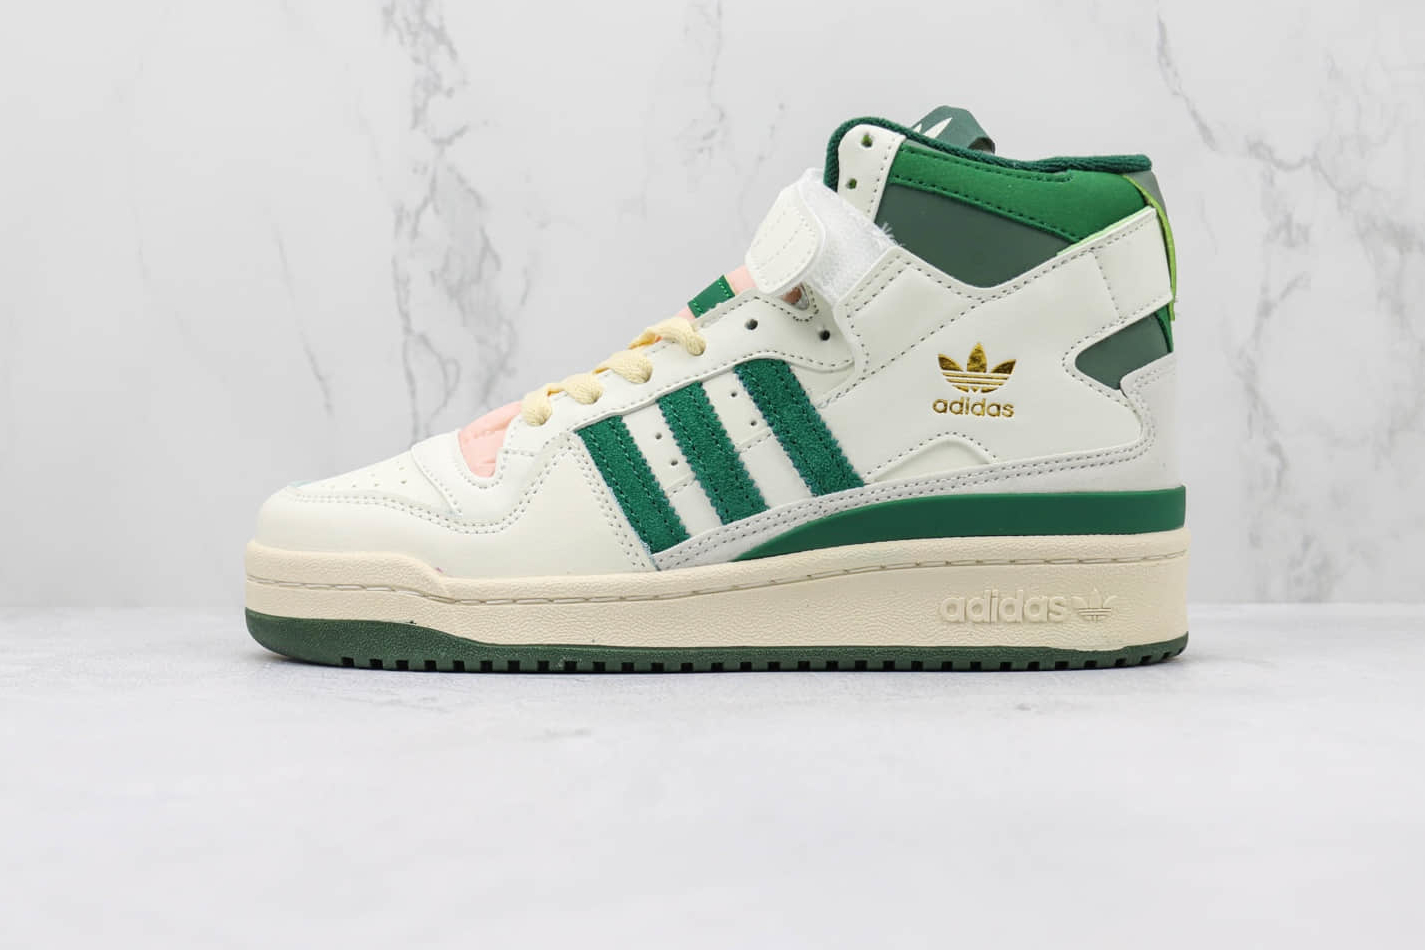 Adidas Forum 84 'Off White Dark Green' GW2203 – Stylish and Unique adidas Sneakers